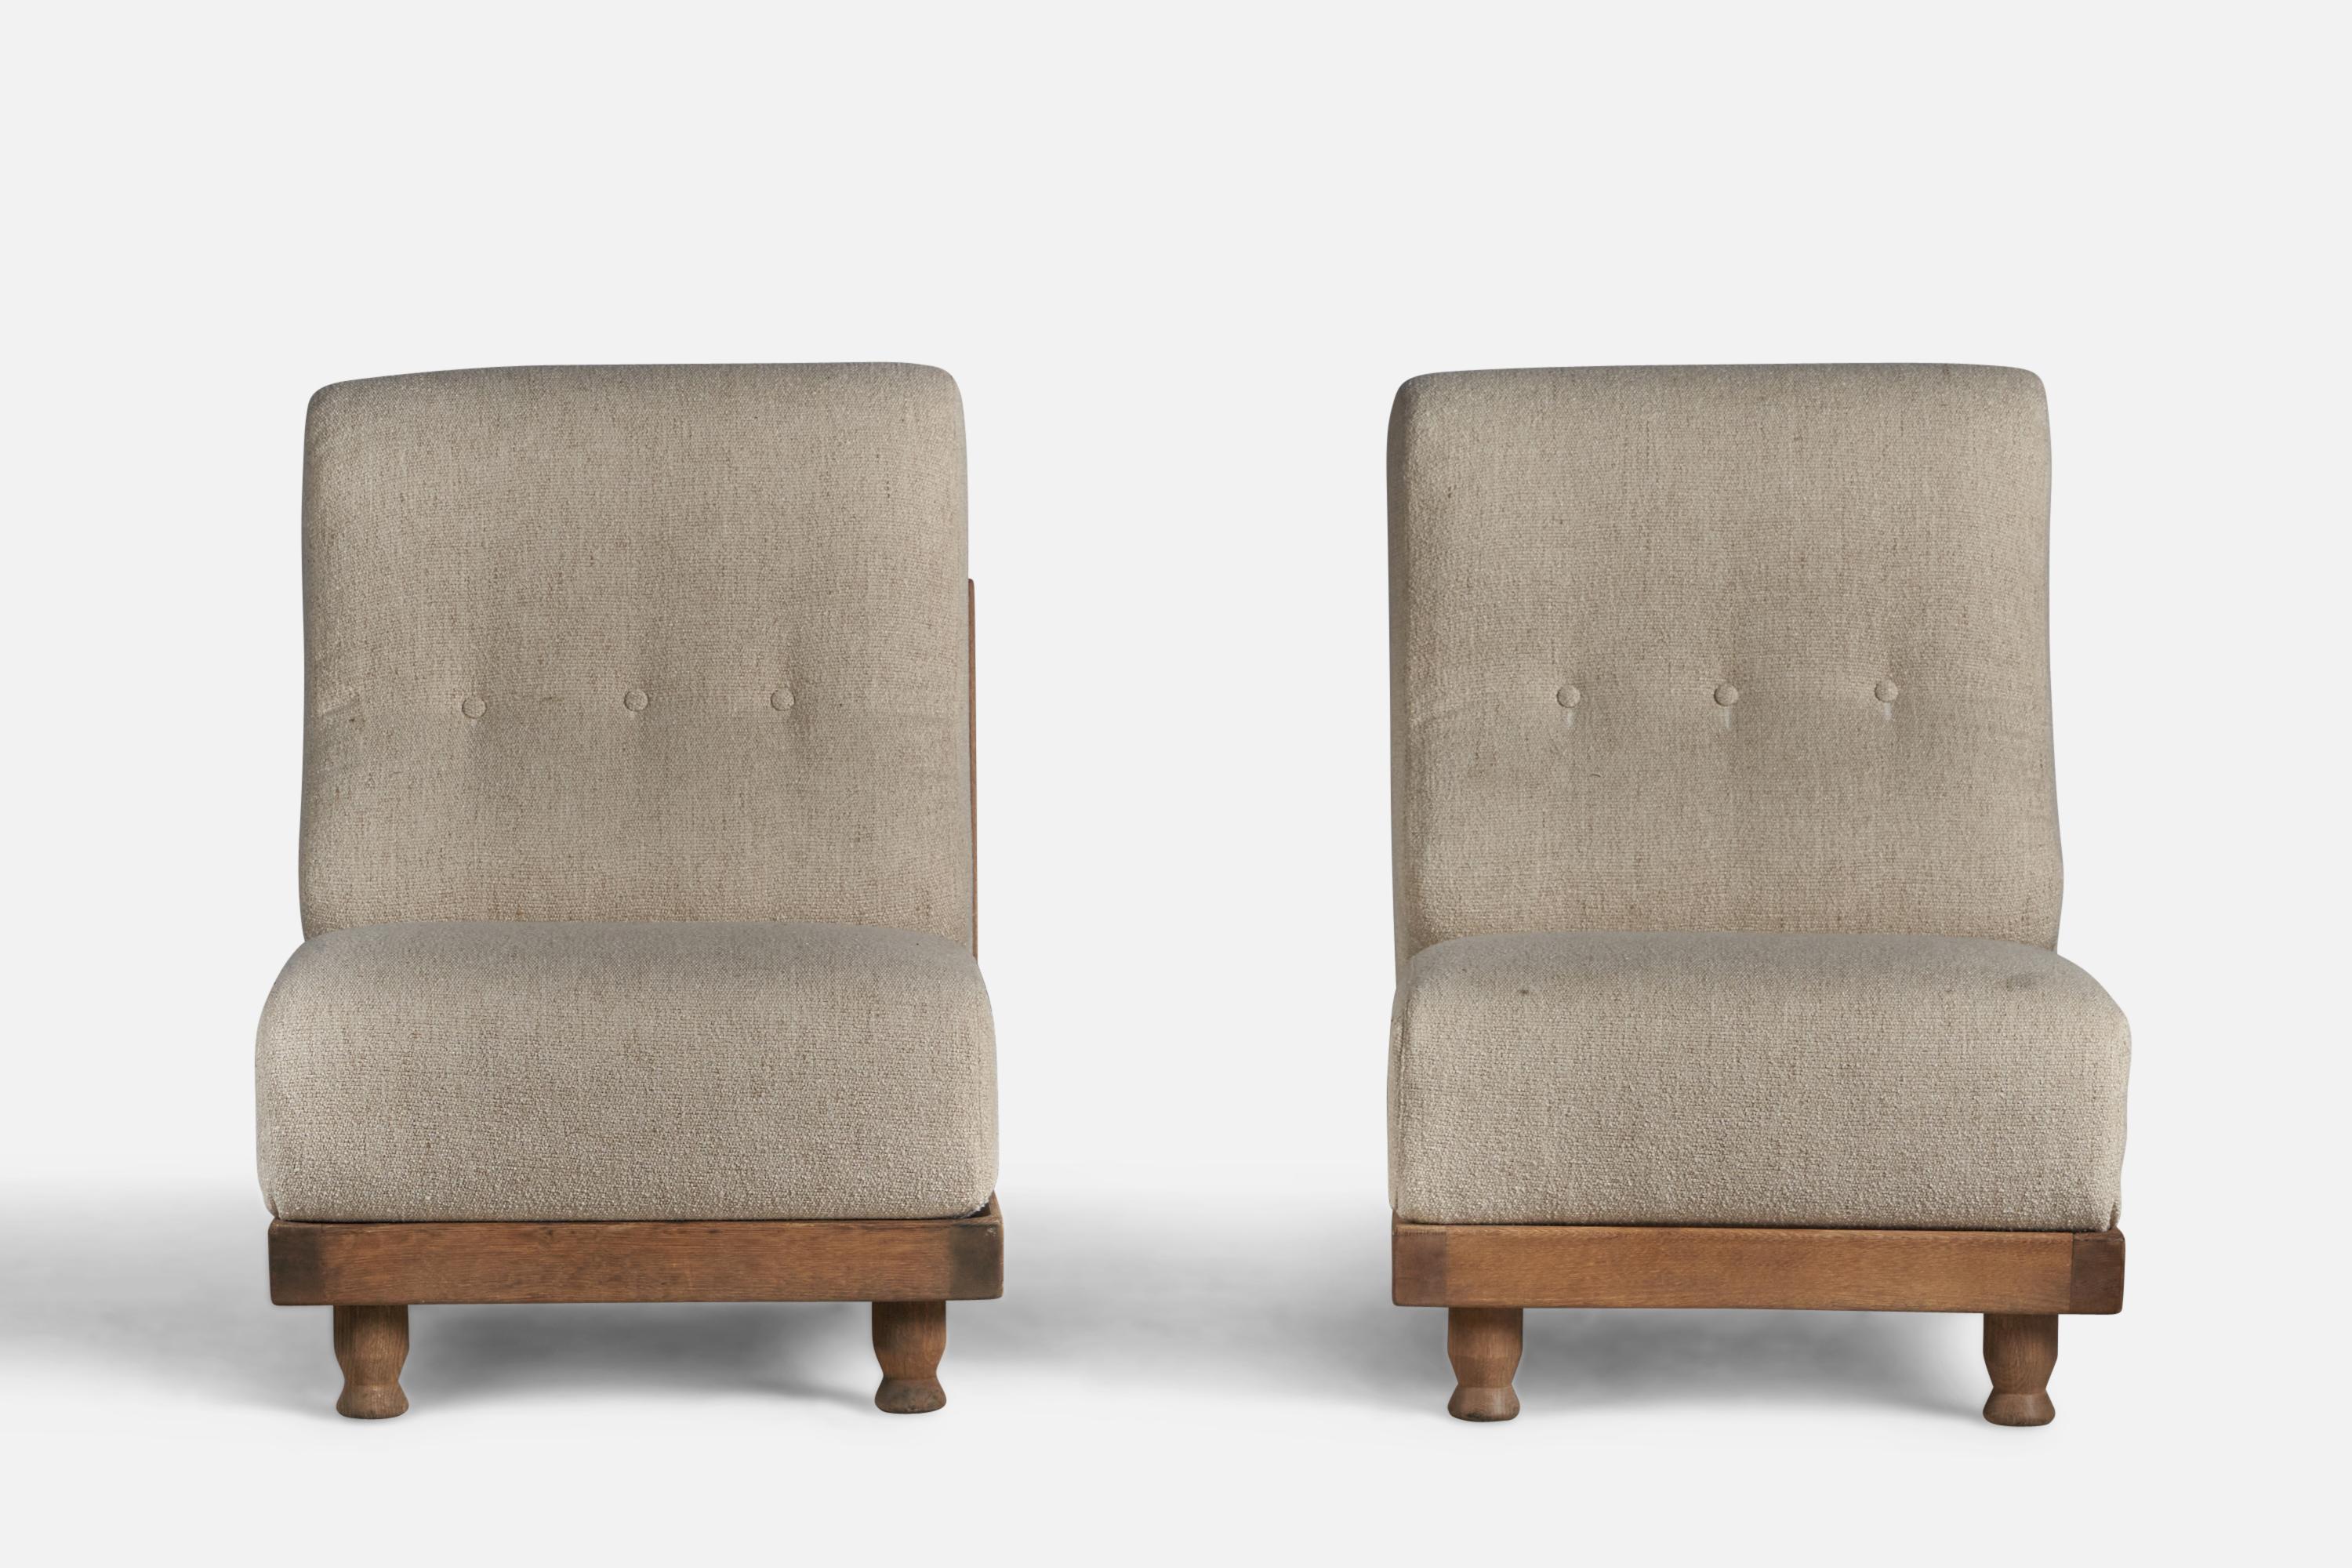 Mid-Century Modern Guillerme & Chambron, Lounge Chairs, Fabric, Oak, France, 1950s For Sale